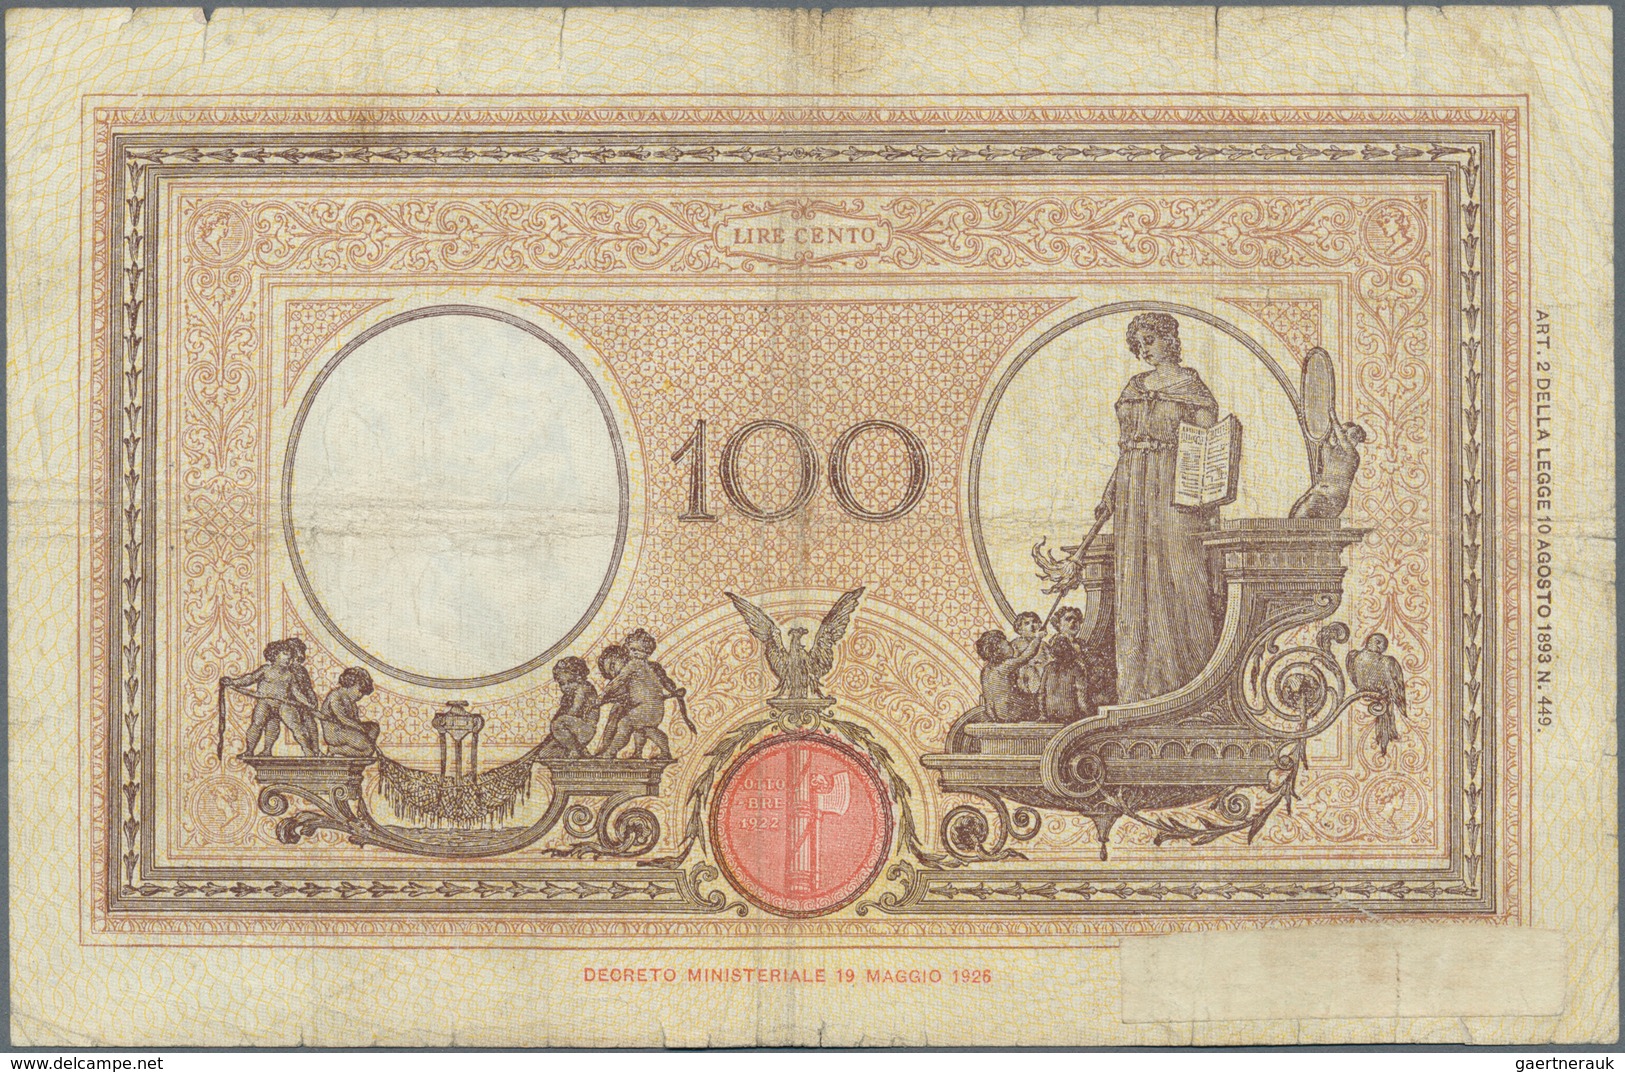 Italy / Italien: set of 6 notes of 100 Lire 1926/28/29/33/34 P. 50, all used with folds, border tear